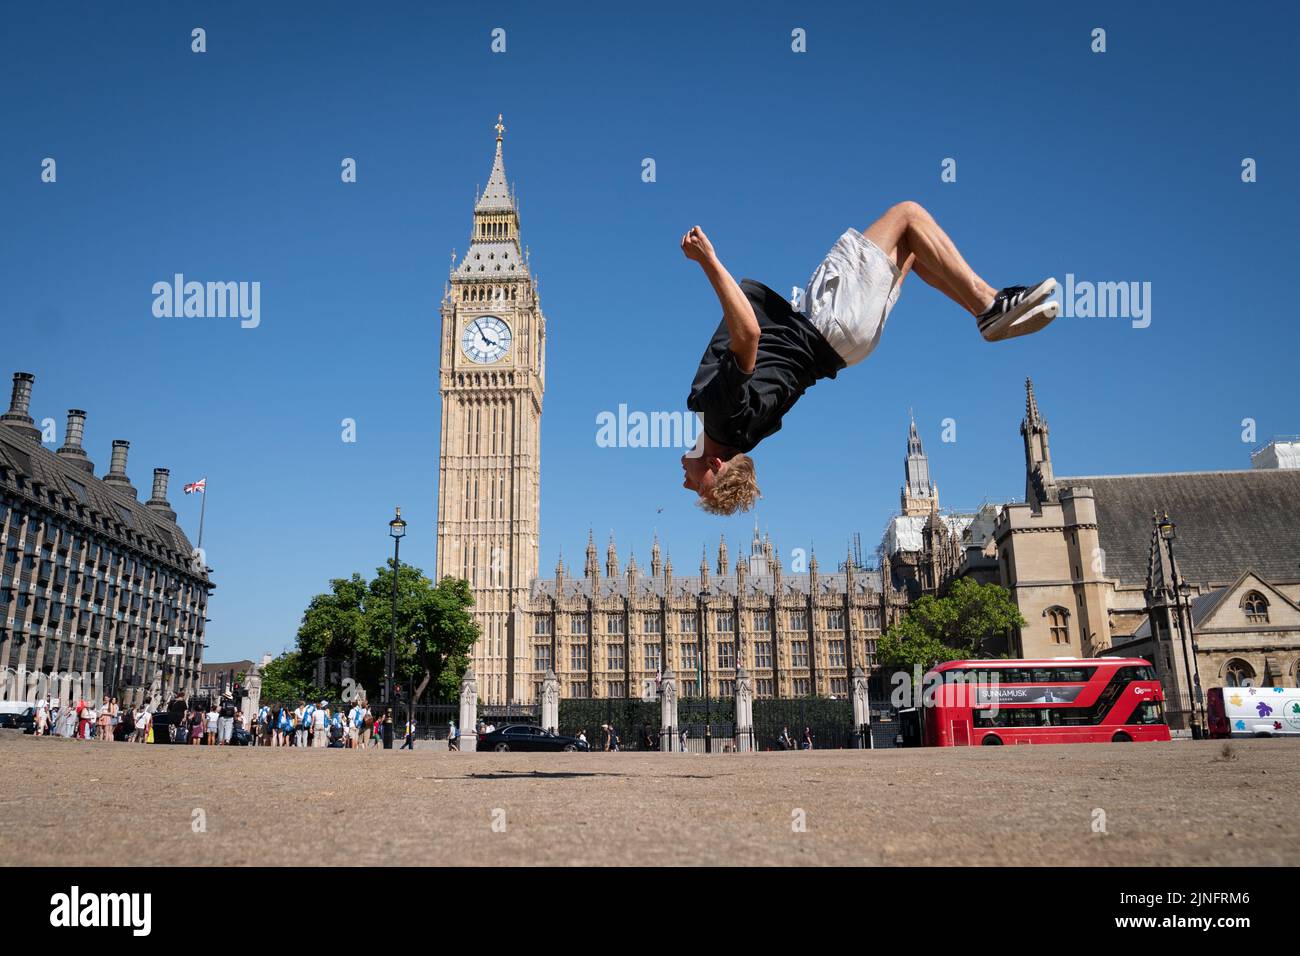 Trampolinist, Johannes Luethi from Austria practices some moves on a dried out Parliament Square in central London after competing in the Freestyle Trampoline World Championships in Hackney, east London. The Met Office has issued an amber heat warning running between Thursday and Sunday, which could see temperatures peak at 36C across southern England and eastern Wales, with some areas facing an 'exceptional' risk of wildfires as the Fire Severity Index is raised to its highest level. Picture date: Thursday August 11, 2022. Stock Photo